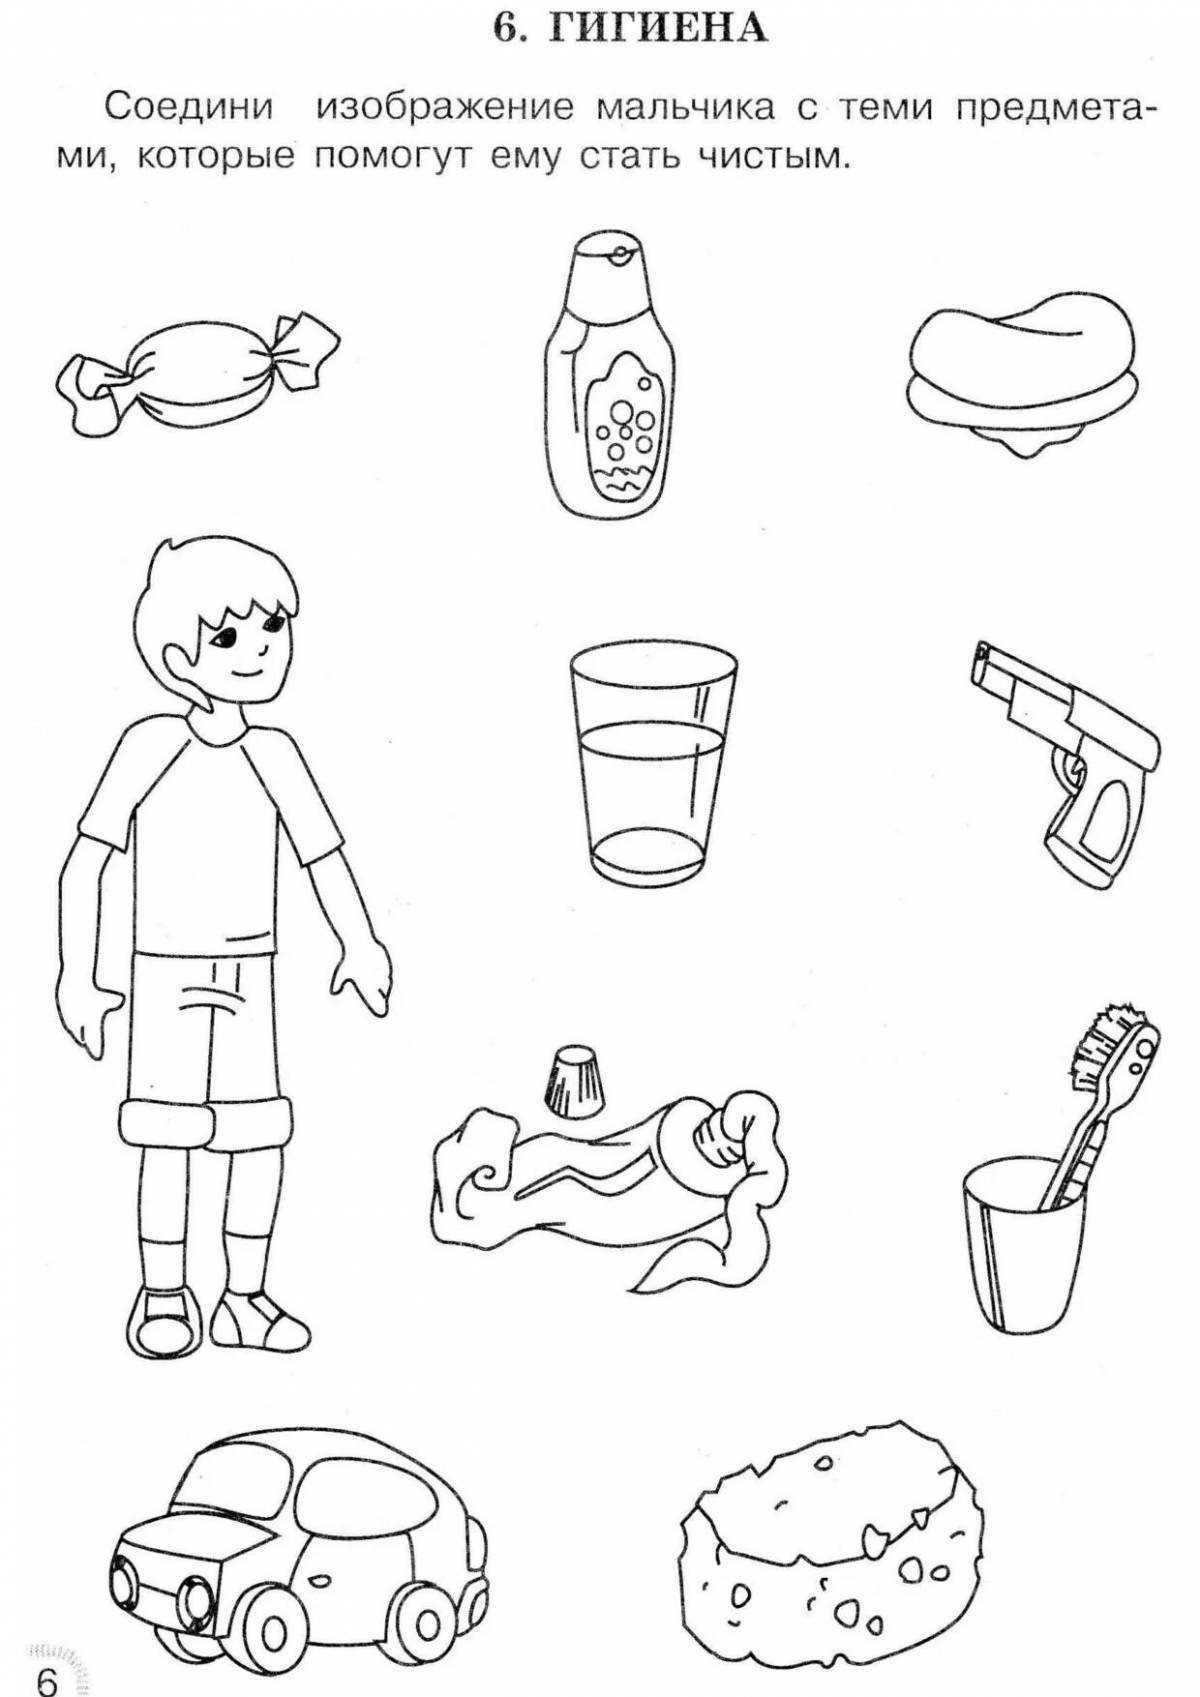 Cute personal care items coloring book